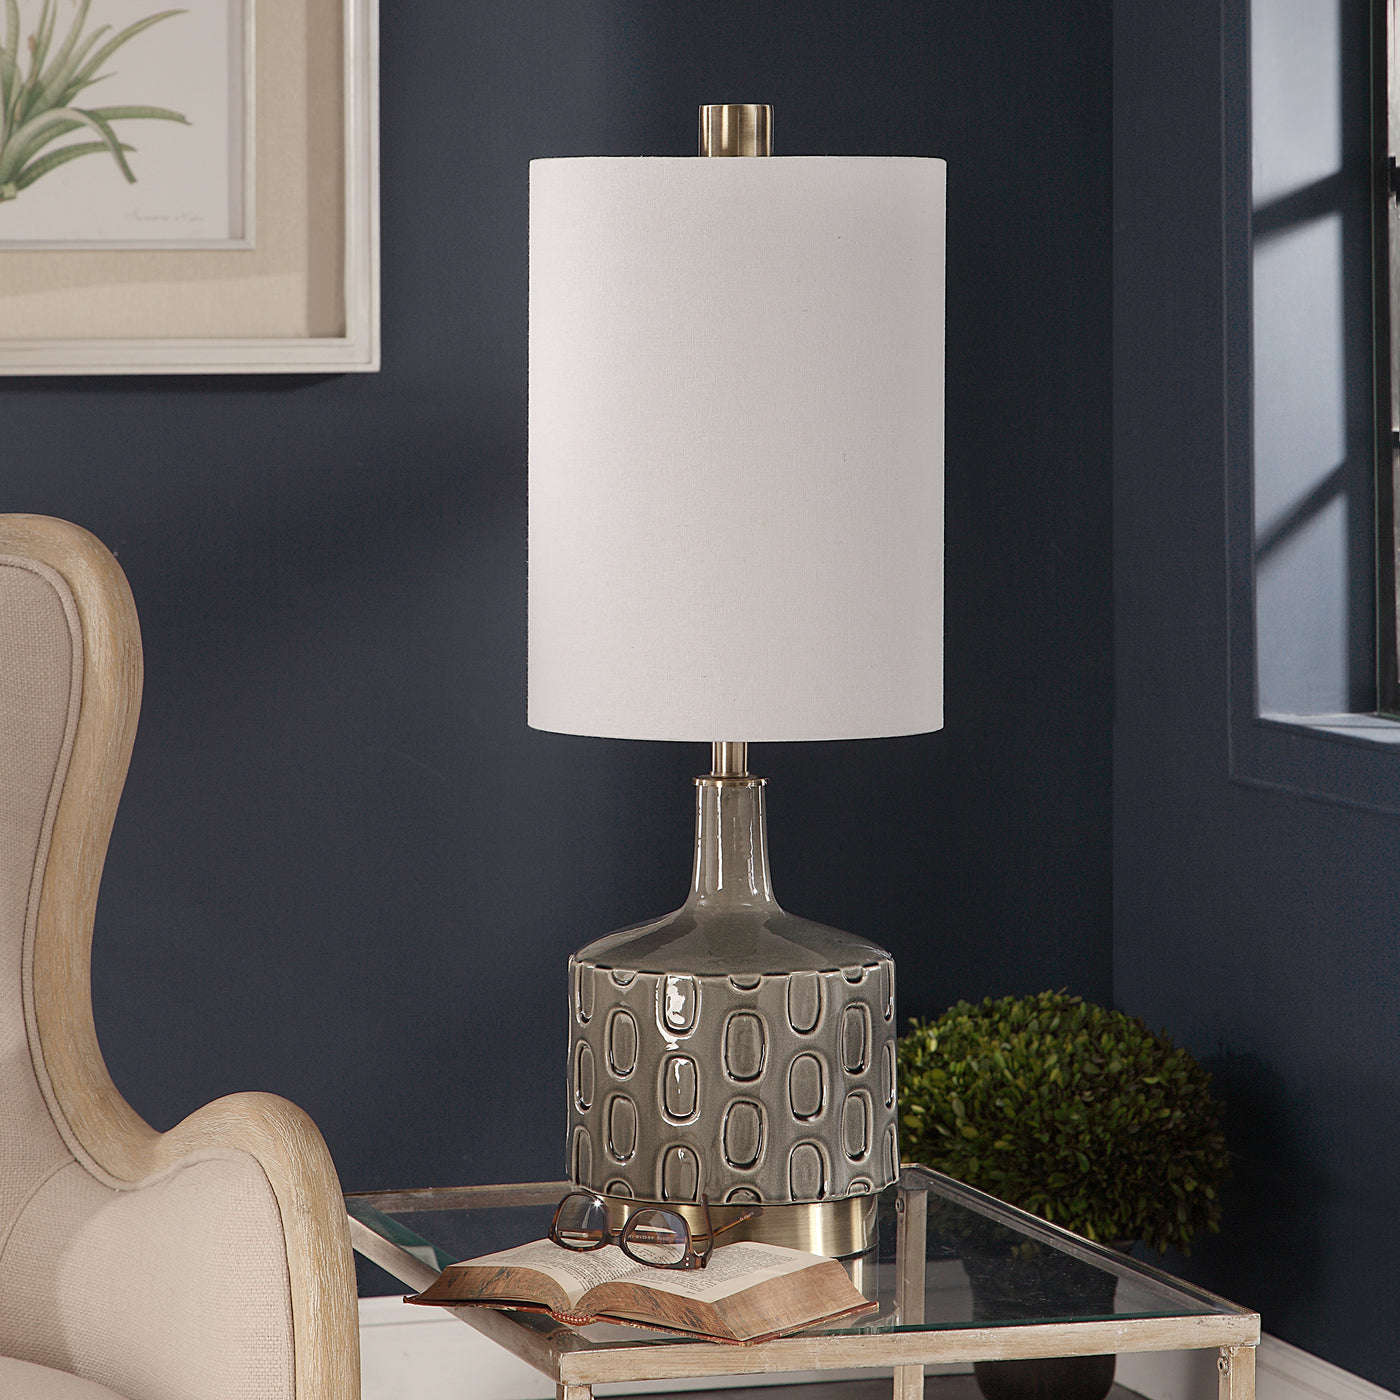 Finished In A Crackled Gray Glaze, This Ceramic Table Lamp Echoes Mid-century And Contemporary Styles. The Base Of This Pi...